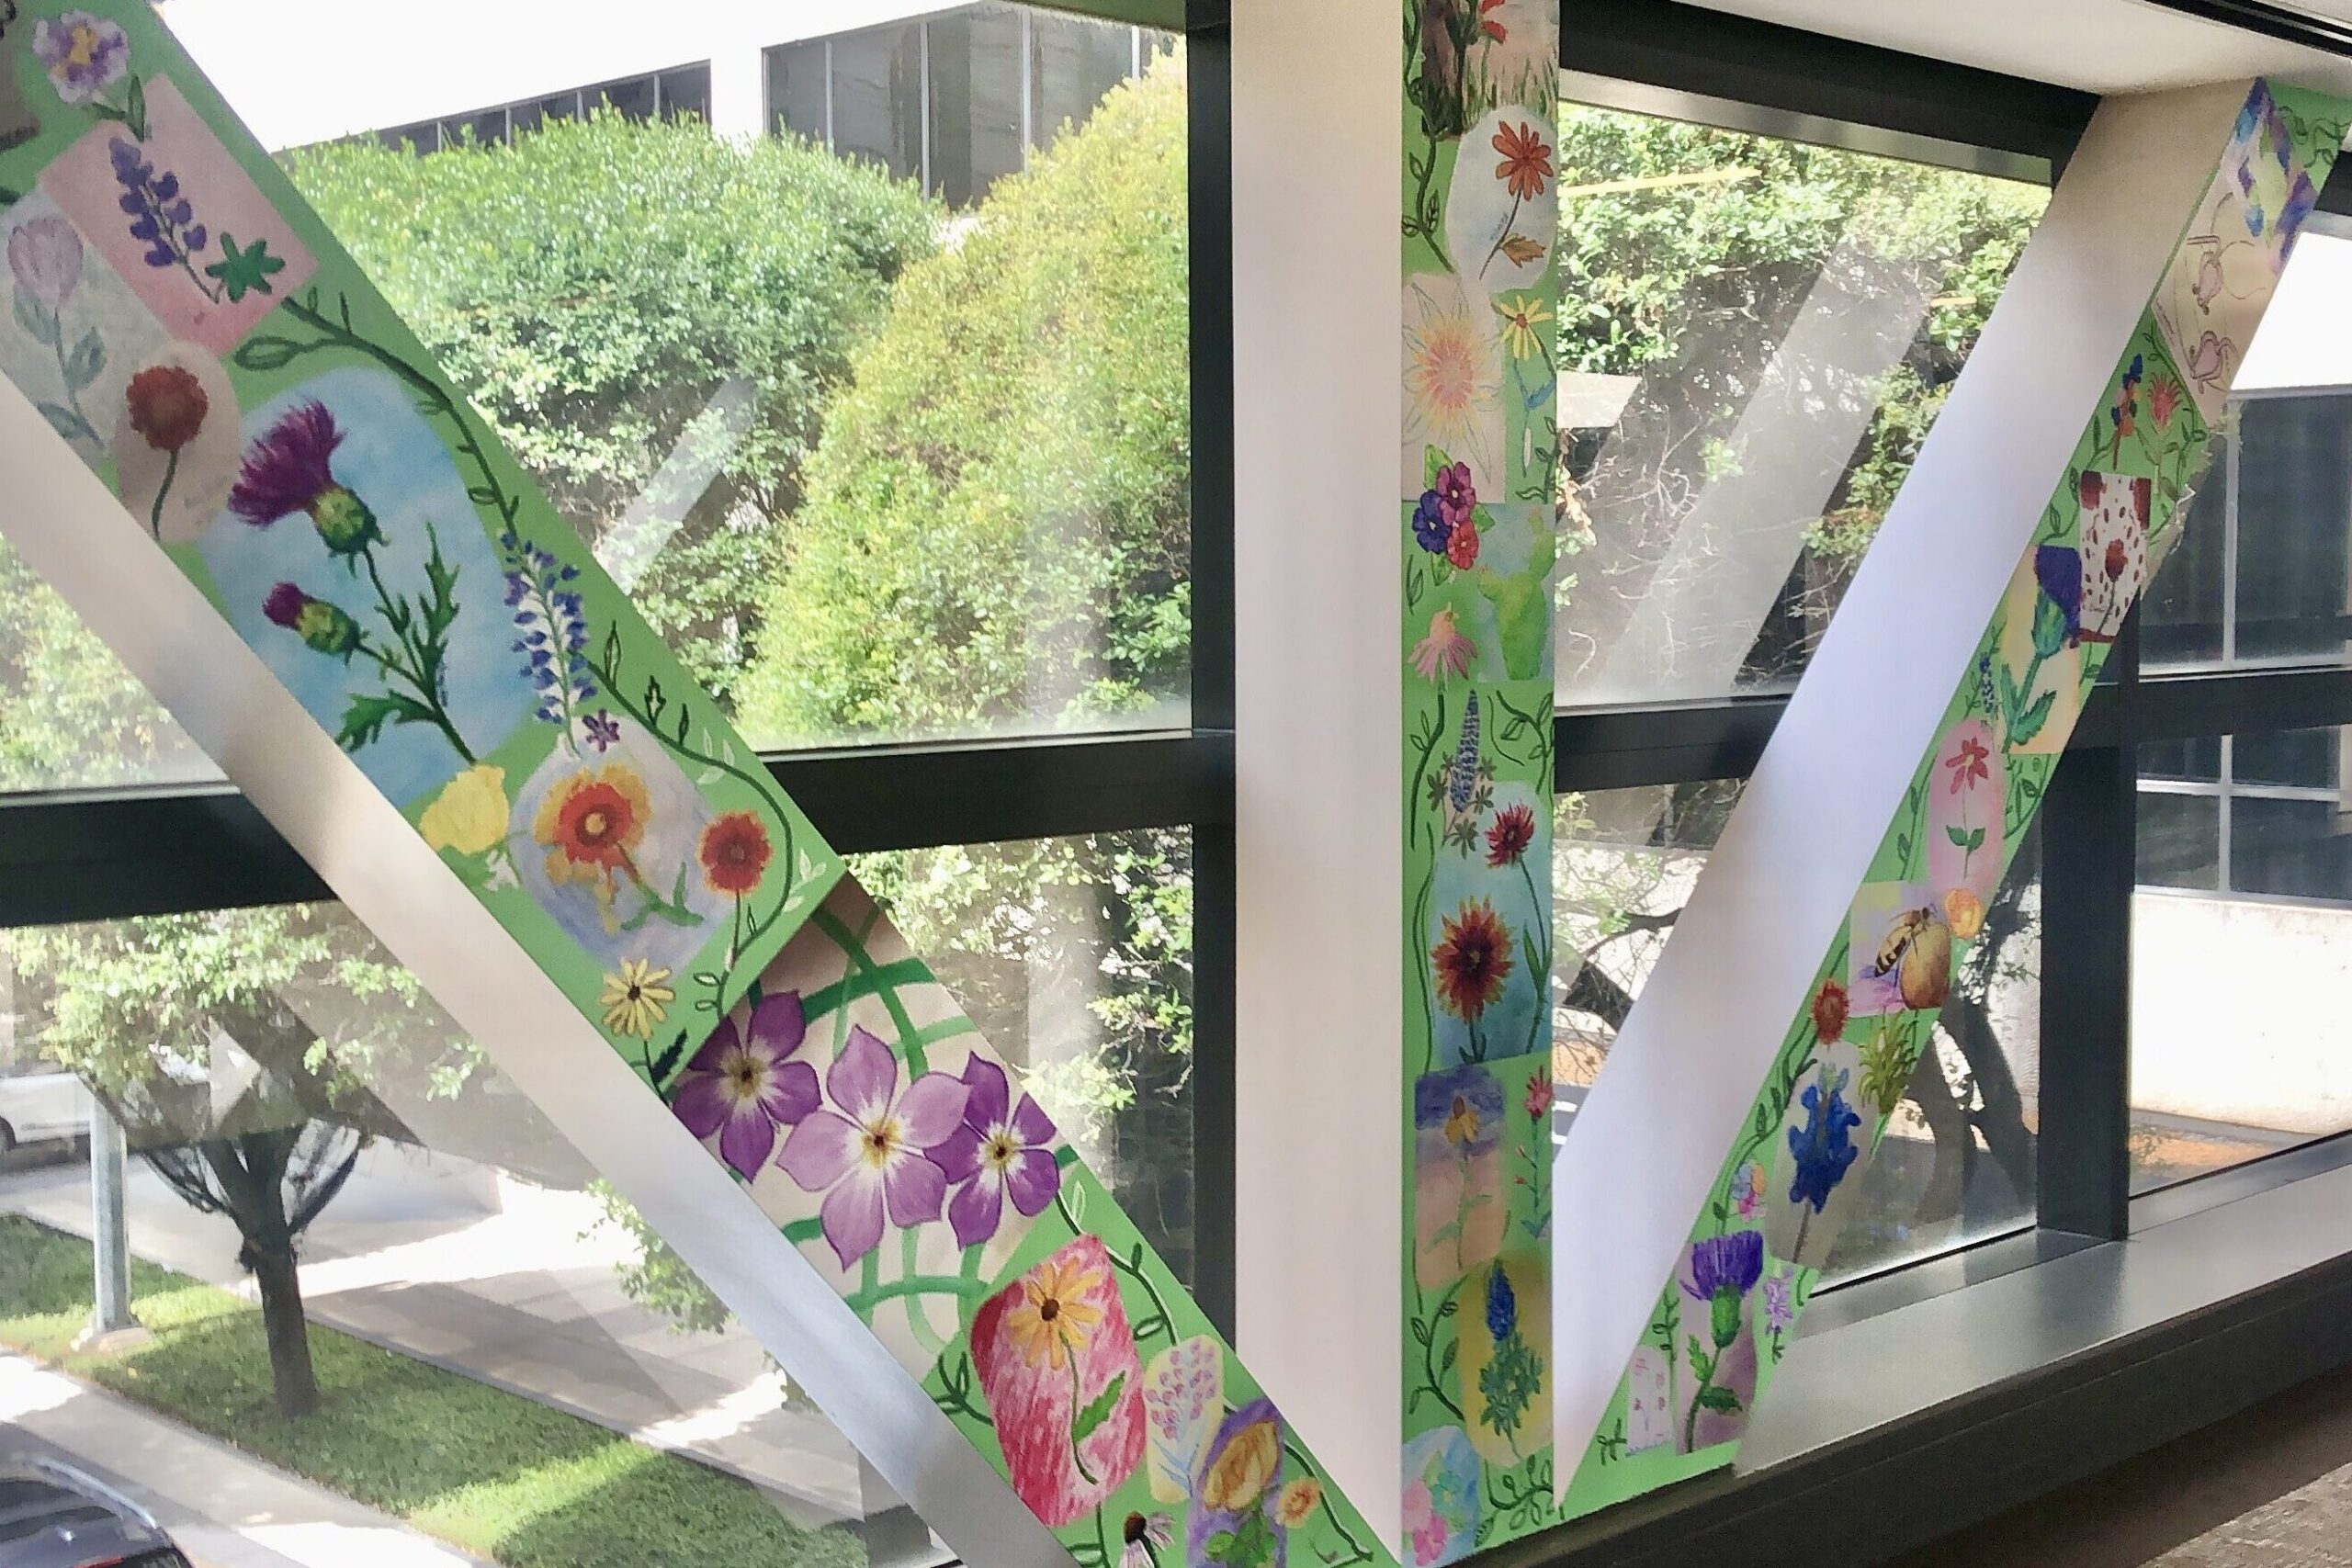 Drawings of Texas flowers on pillars decorated with green background at Houston Methodist crosswalk windows facing Fannin St.